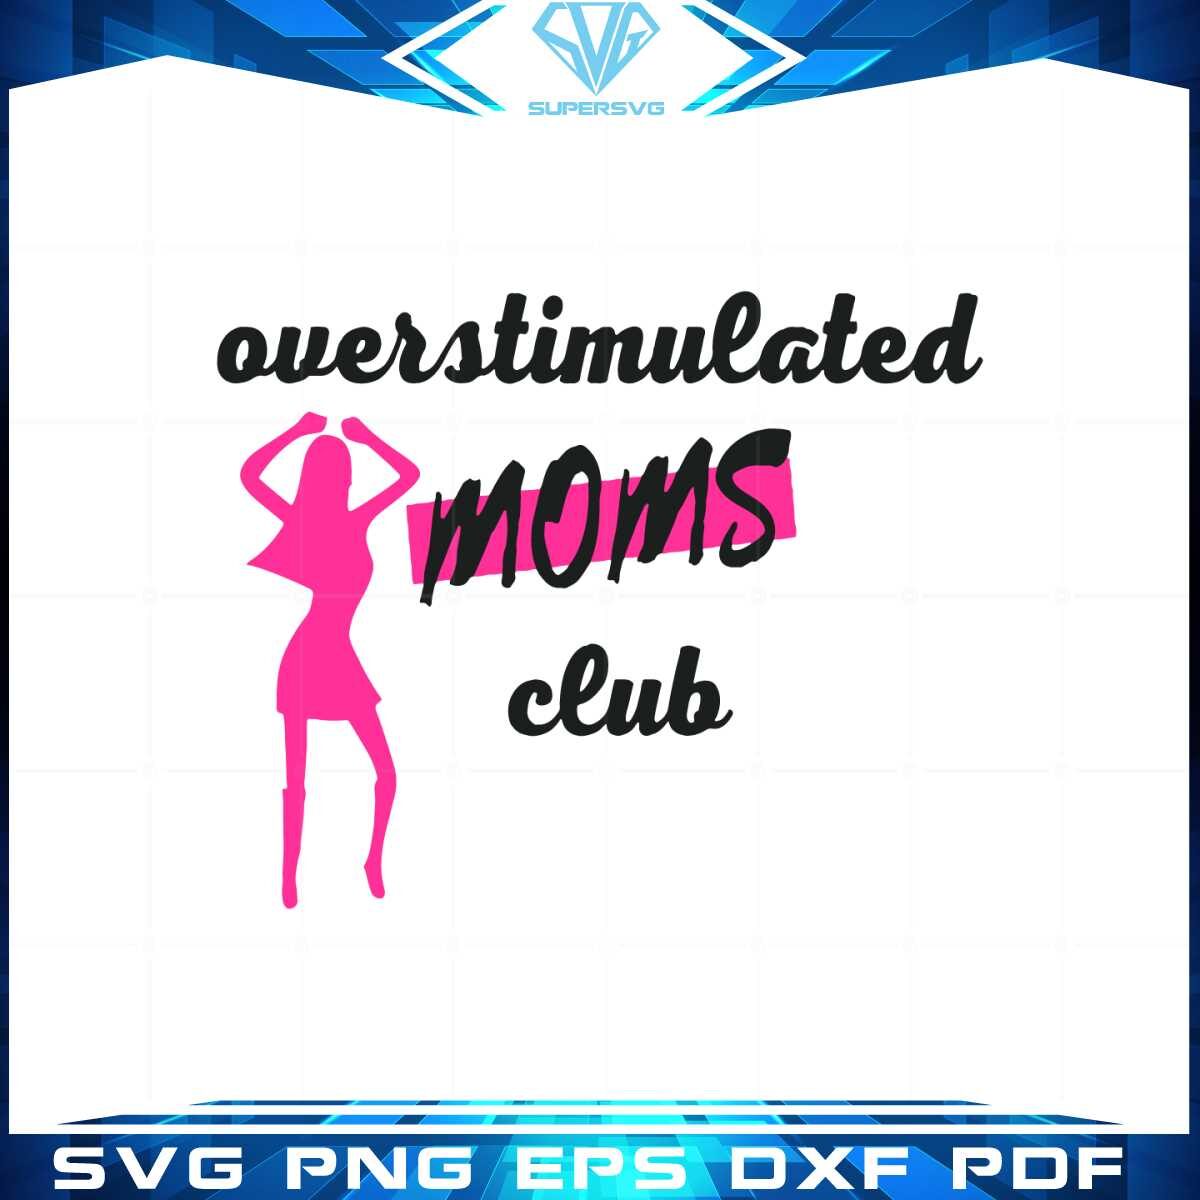 overstimulated-moms-club-svg-files-for-cricut-sublimation-files